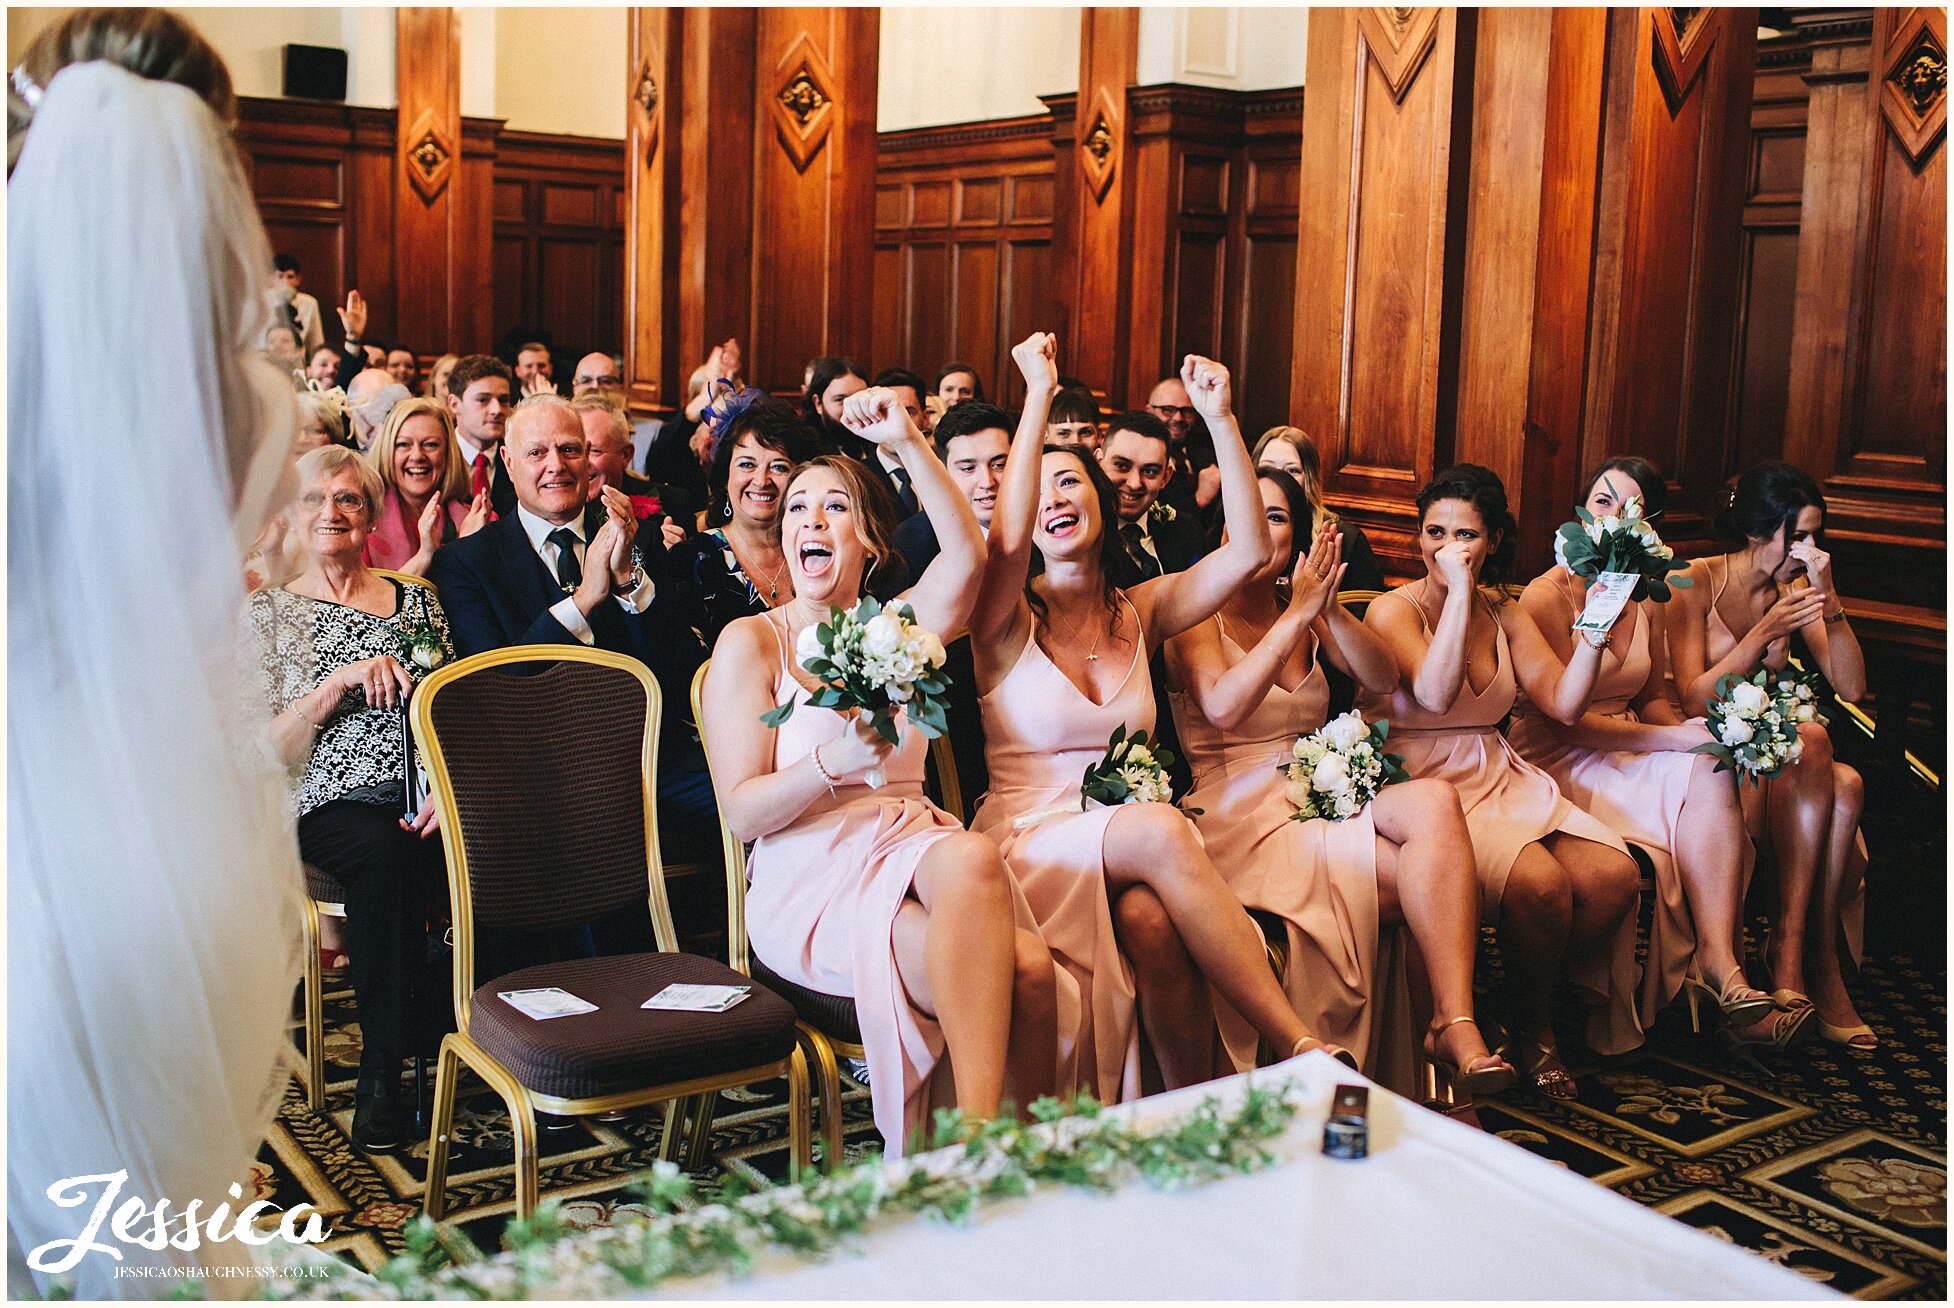 bridemaids cheer after the wedding ceremony at the midland hotel, manchester